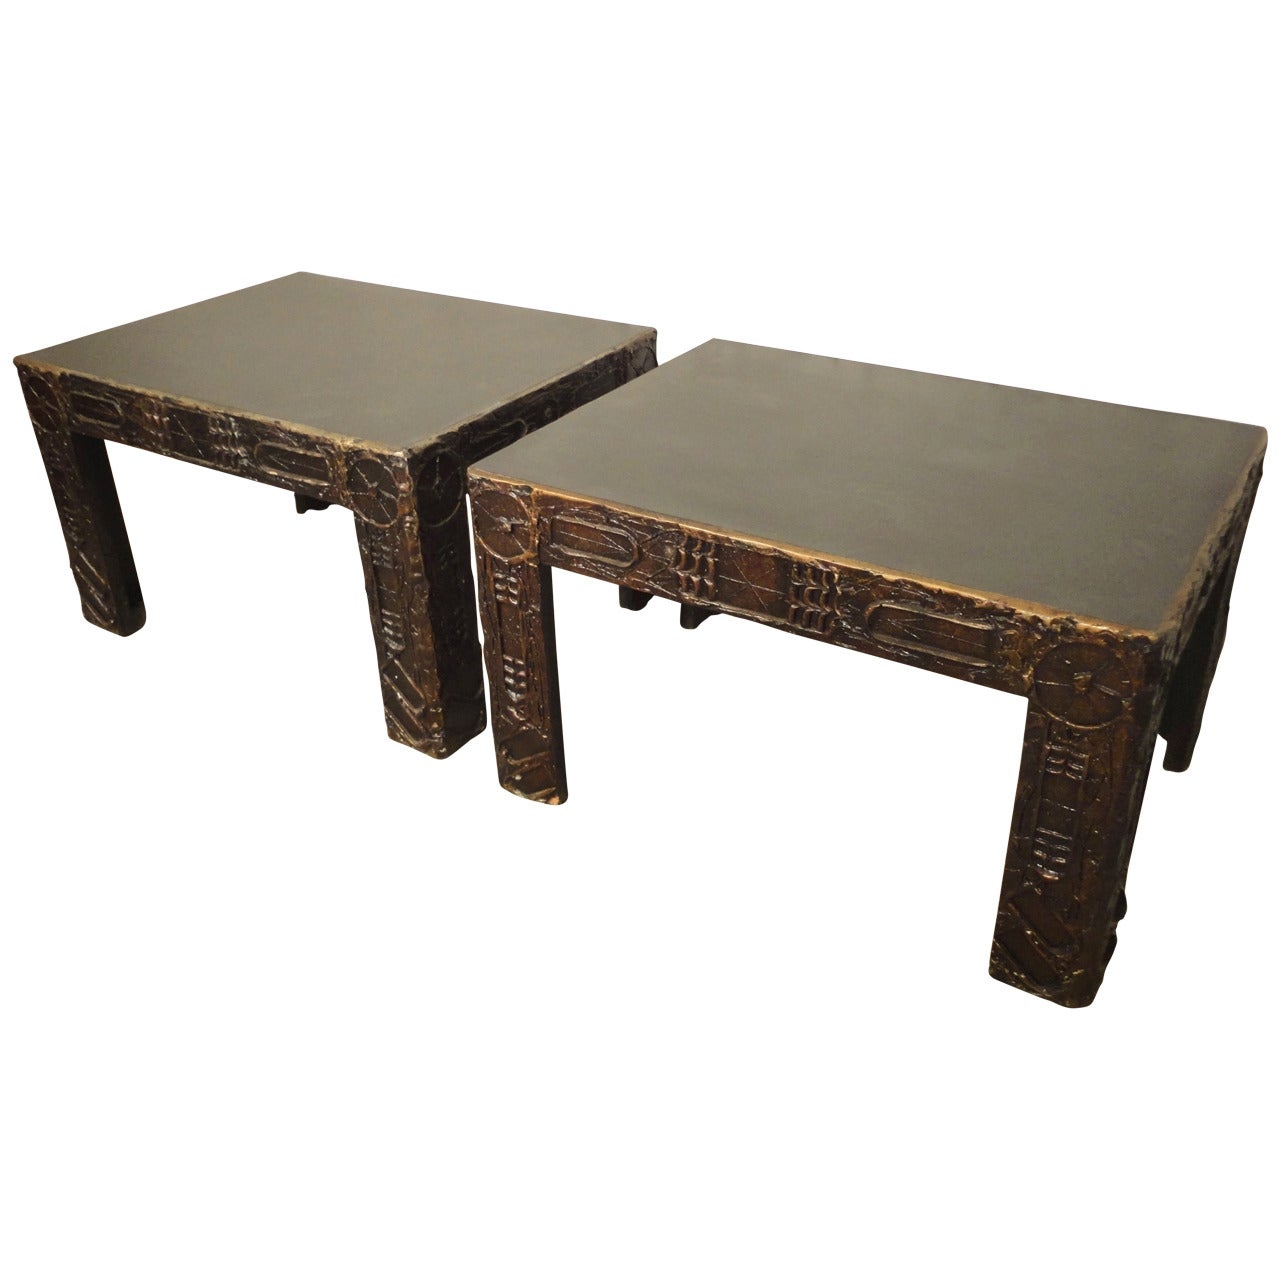 Adrian Pearsall Sculpted Brutalist Tables